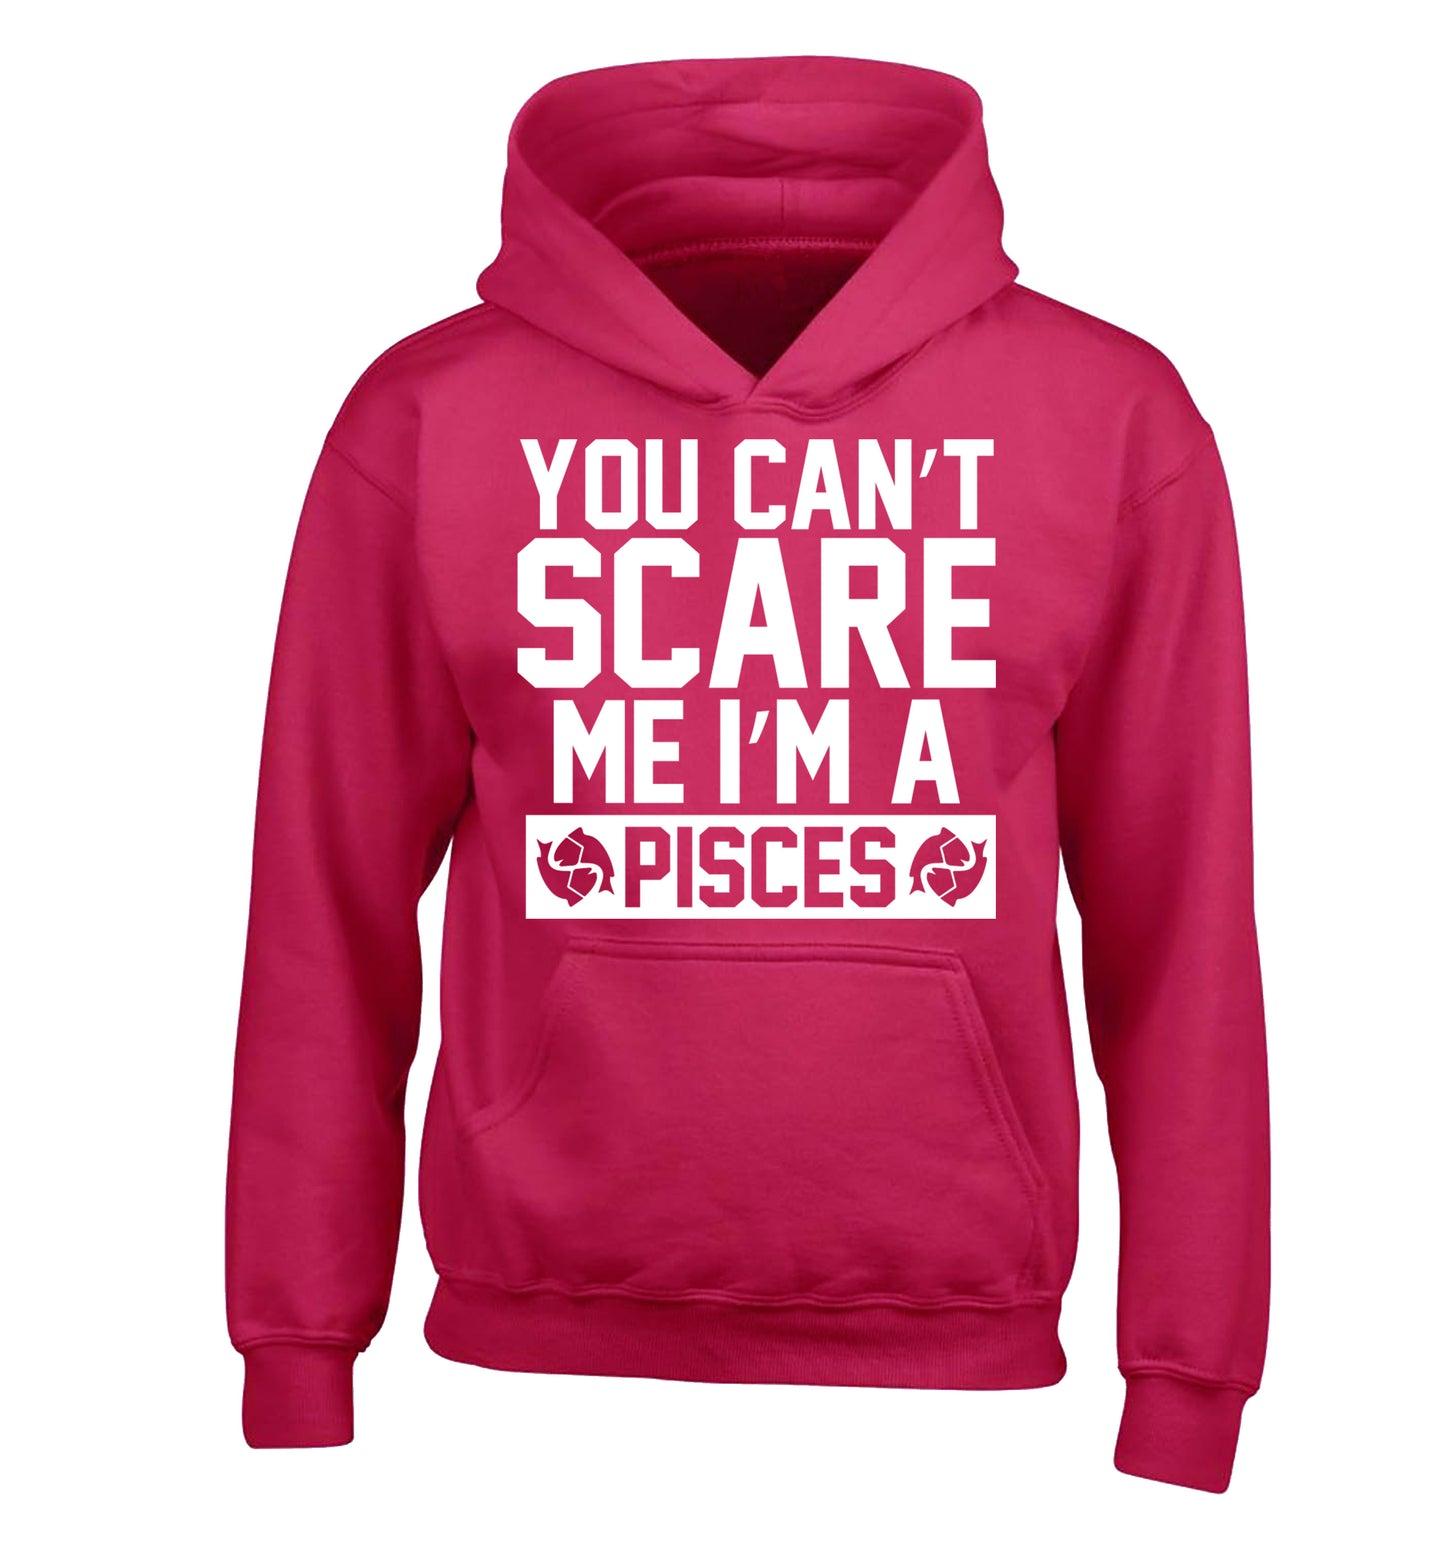 You can't scare me I'm a pisces children's pink hoodie 12-13 Years